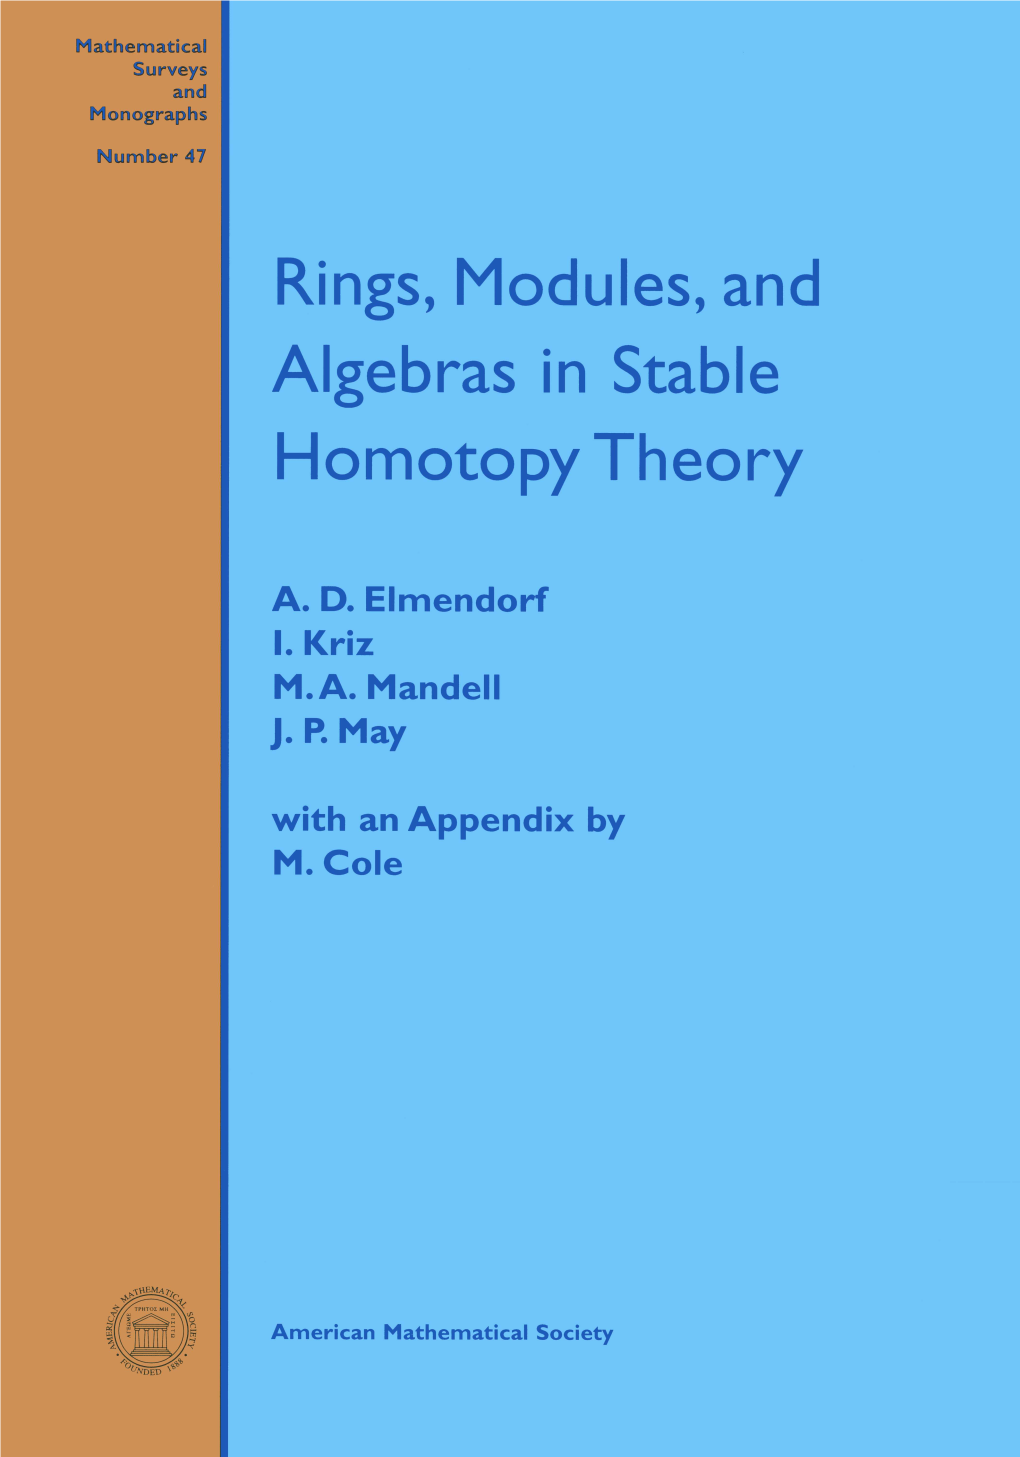 Rings, Modules, and Algebras in Stable Homotopy Theory, 1997 46 Stephen Lipscomb, Symmetric Inverse Semigroups, 1996 45 George M